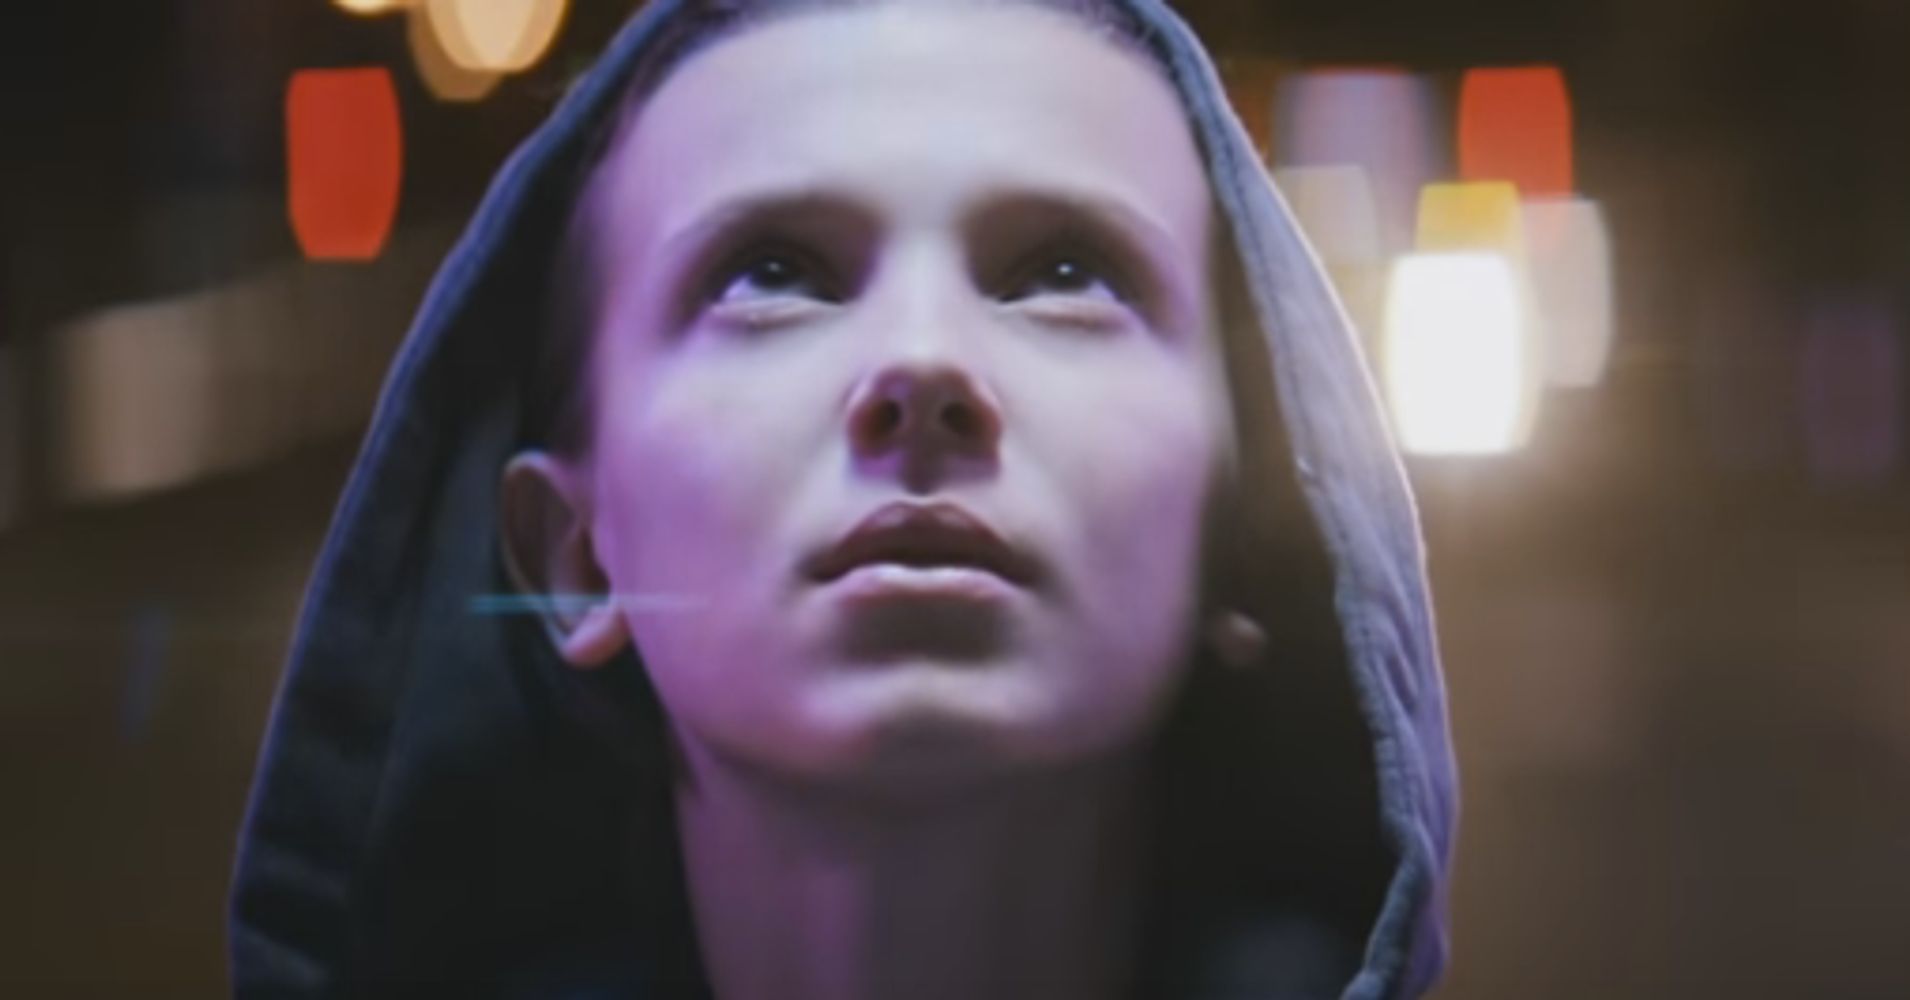 Millie Bobby Brown Cranks Her Lip-Syncing Skills To 11 In New Music Video | HuffPost1910 x 1000